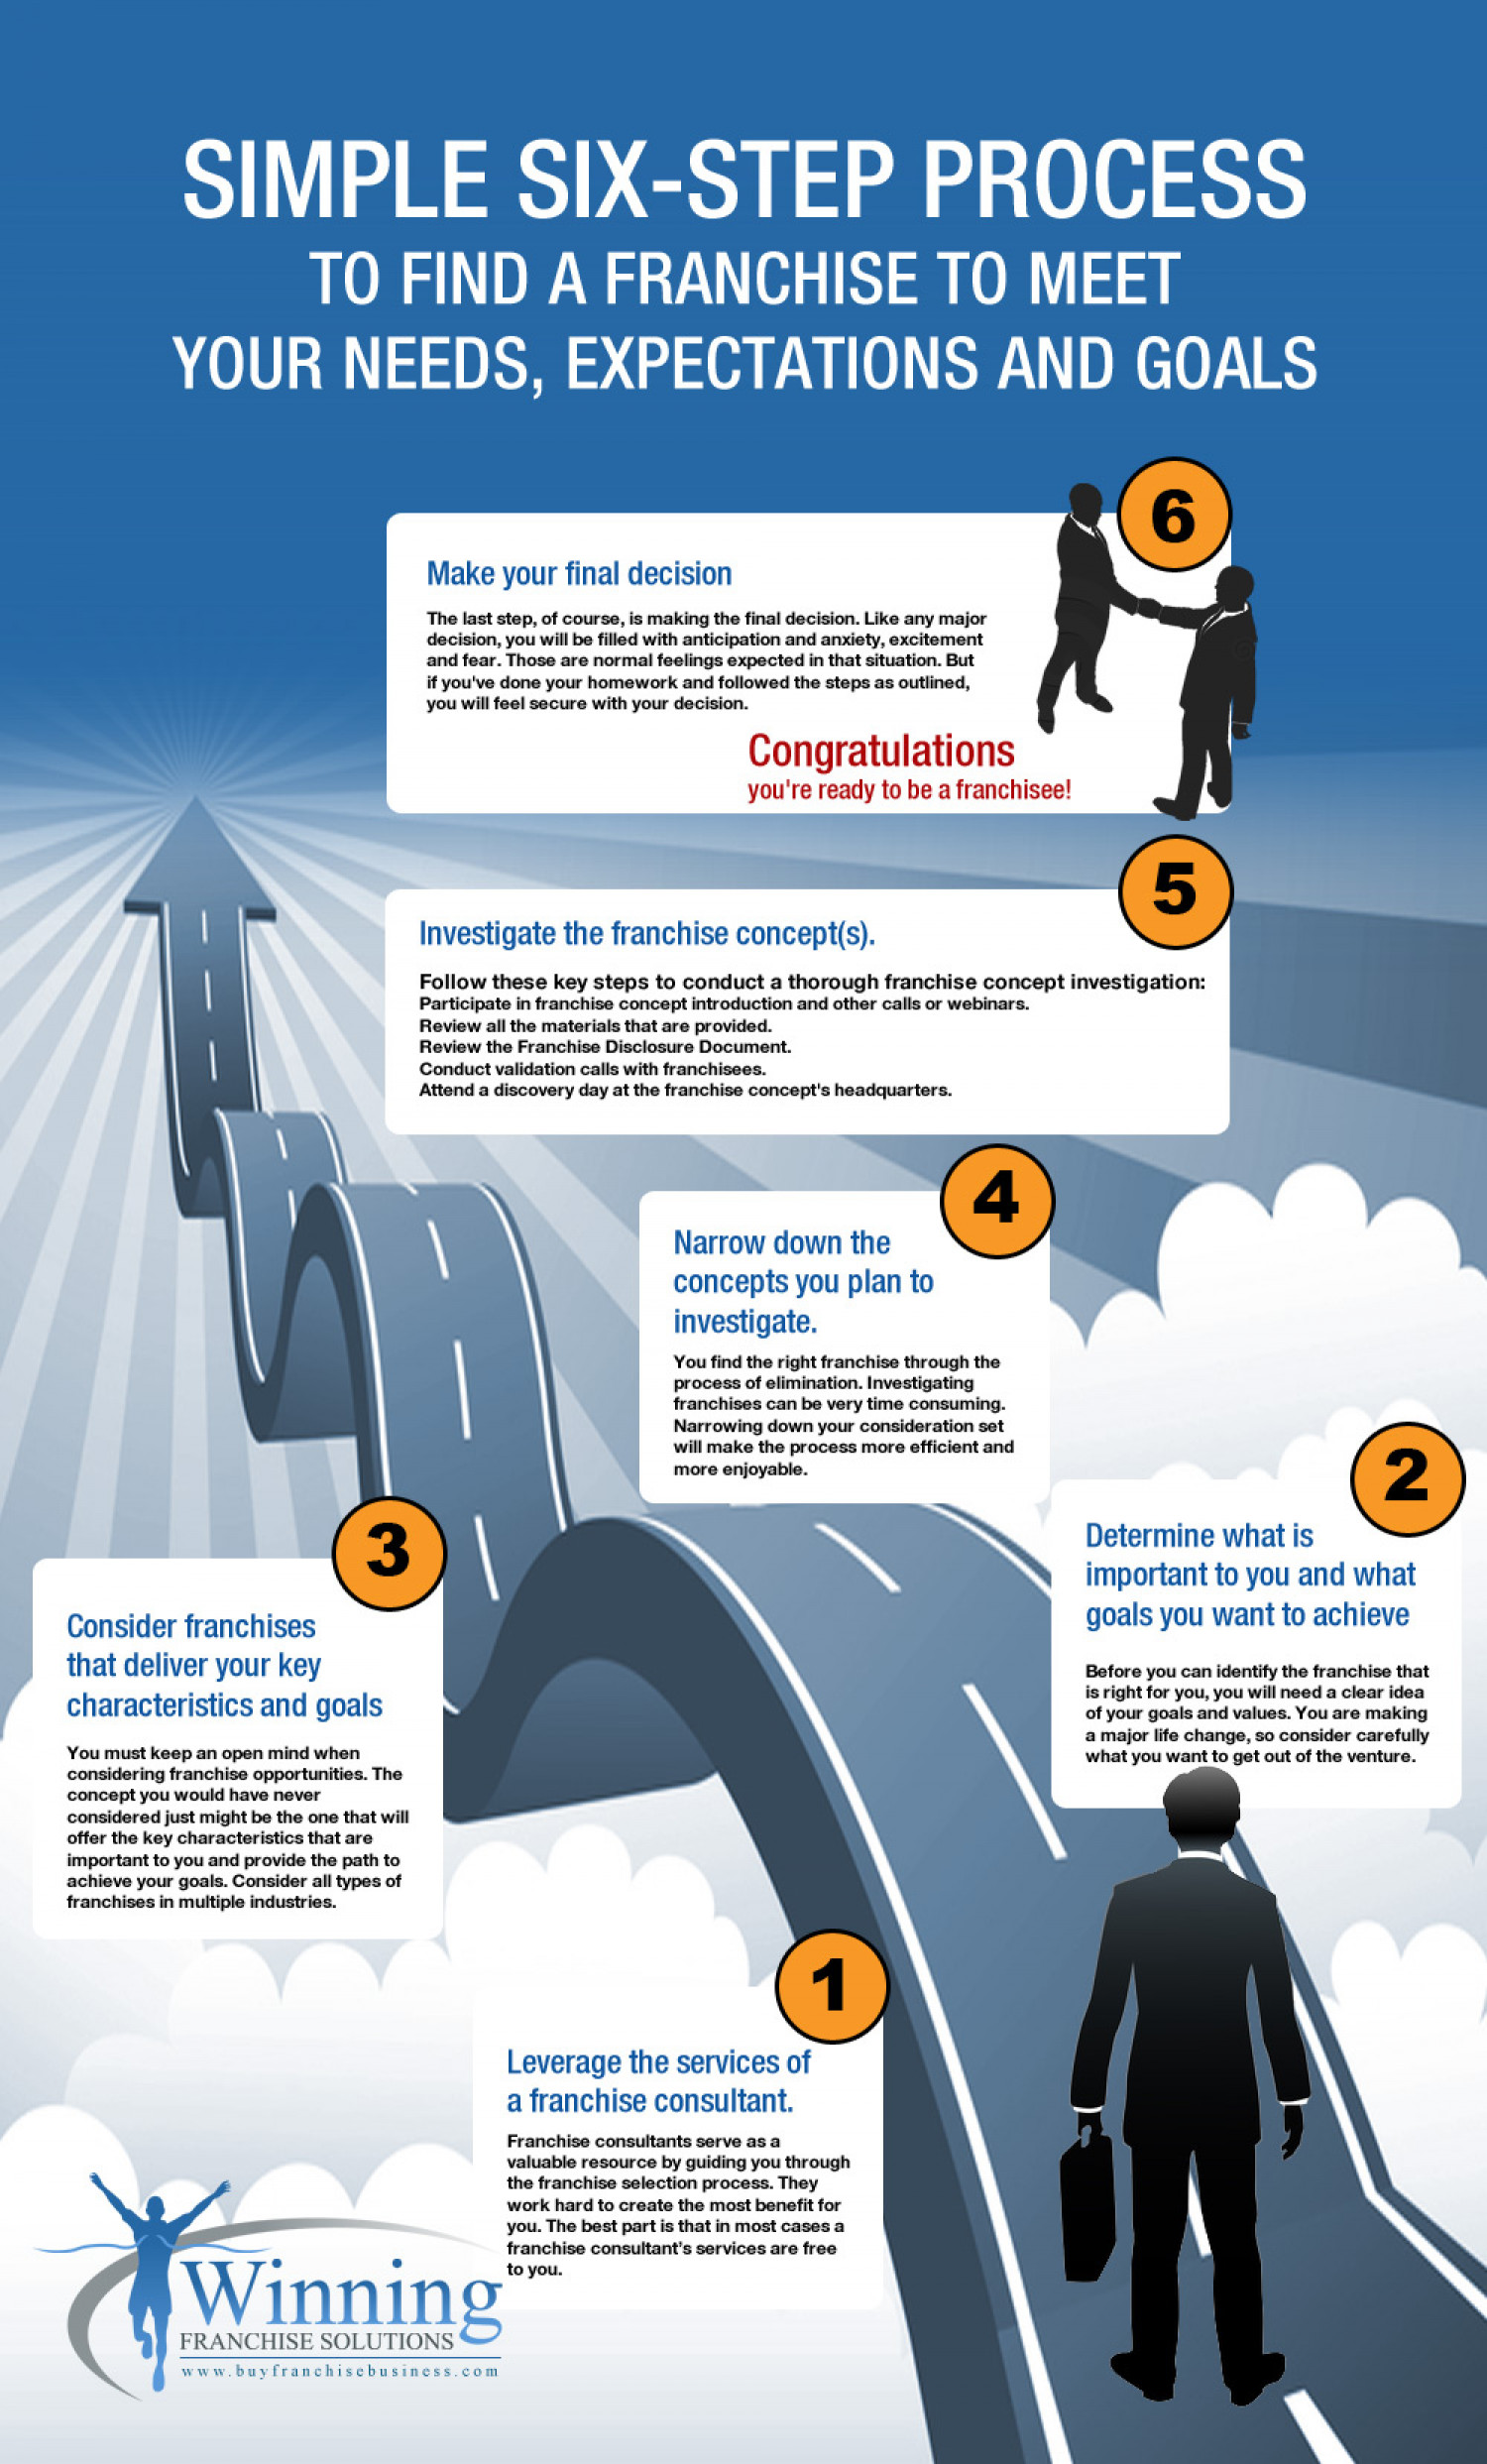 Simple Six-Step Process to Find a Franchise Infographic